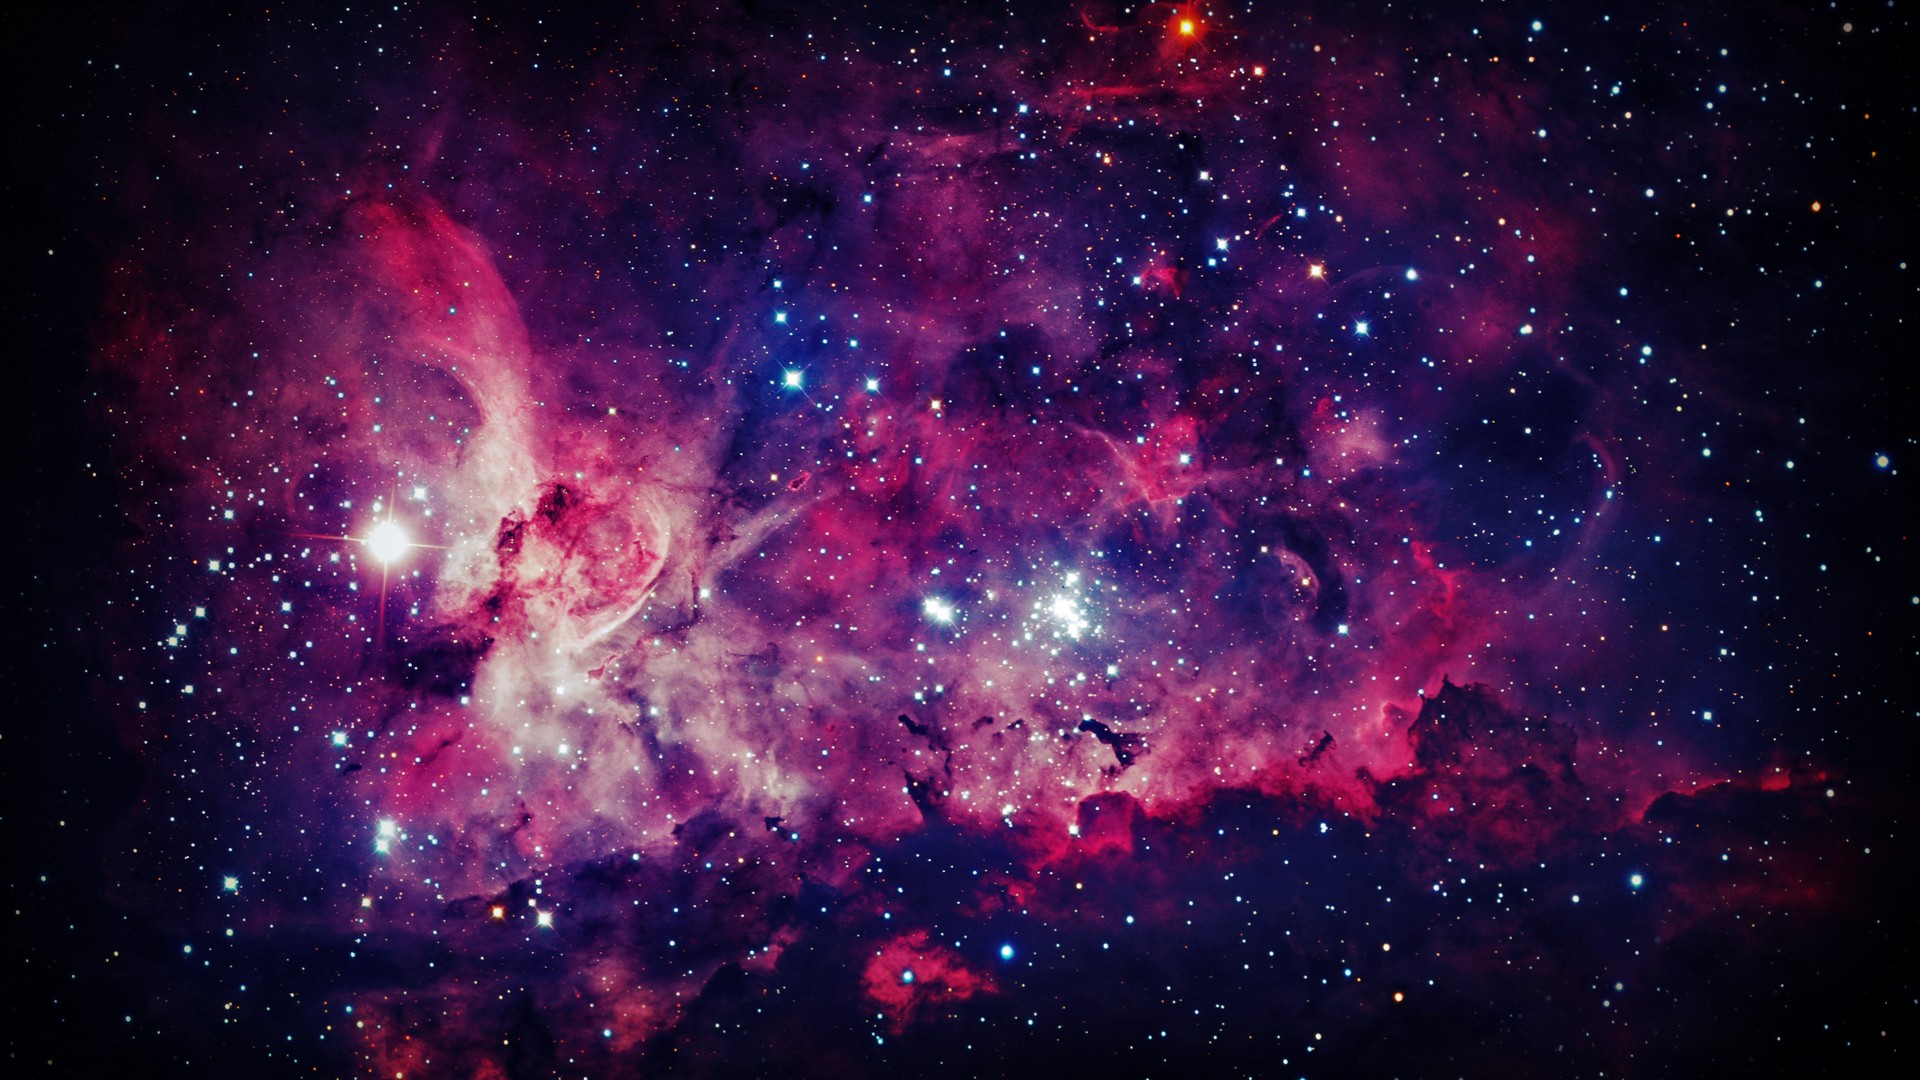 Best Space Wallpaper HD with high-resolution 1920x1080 pixel. You can use this wallpaper for your Desktop Computer Backgrounds, Mac Wallpapers, Android Lock screen or iPhone Screensavers and another smartphone device